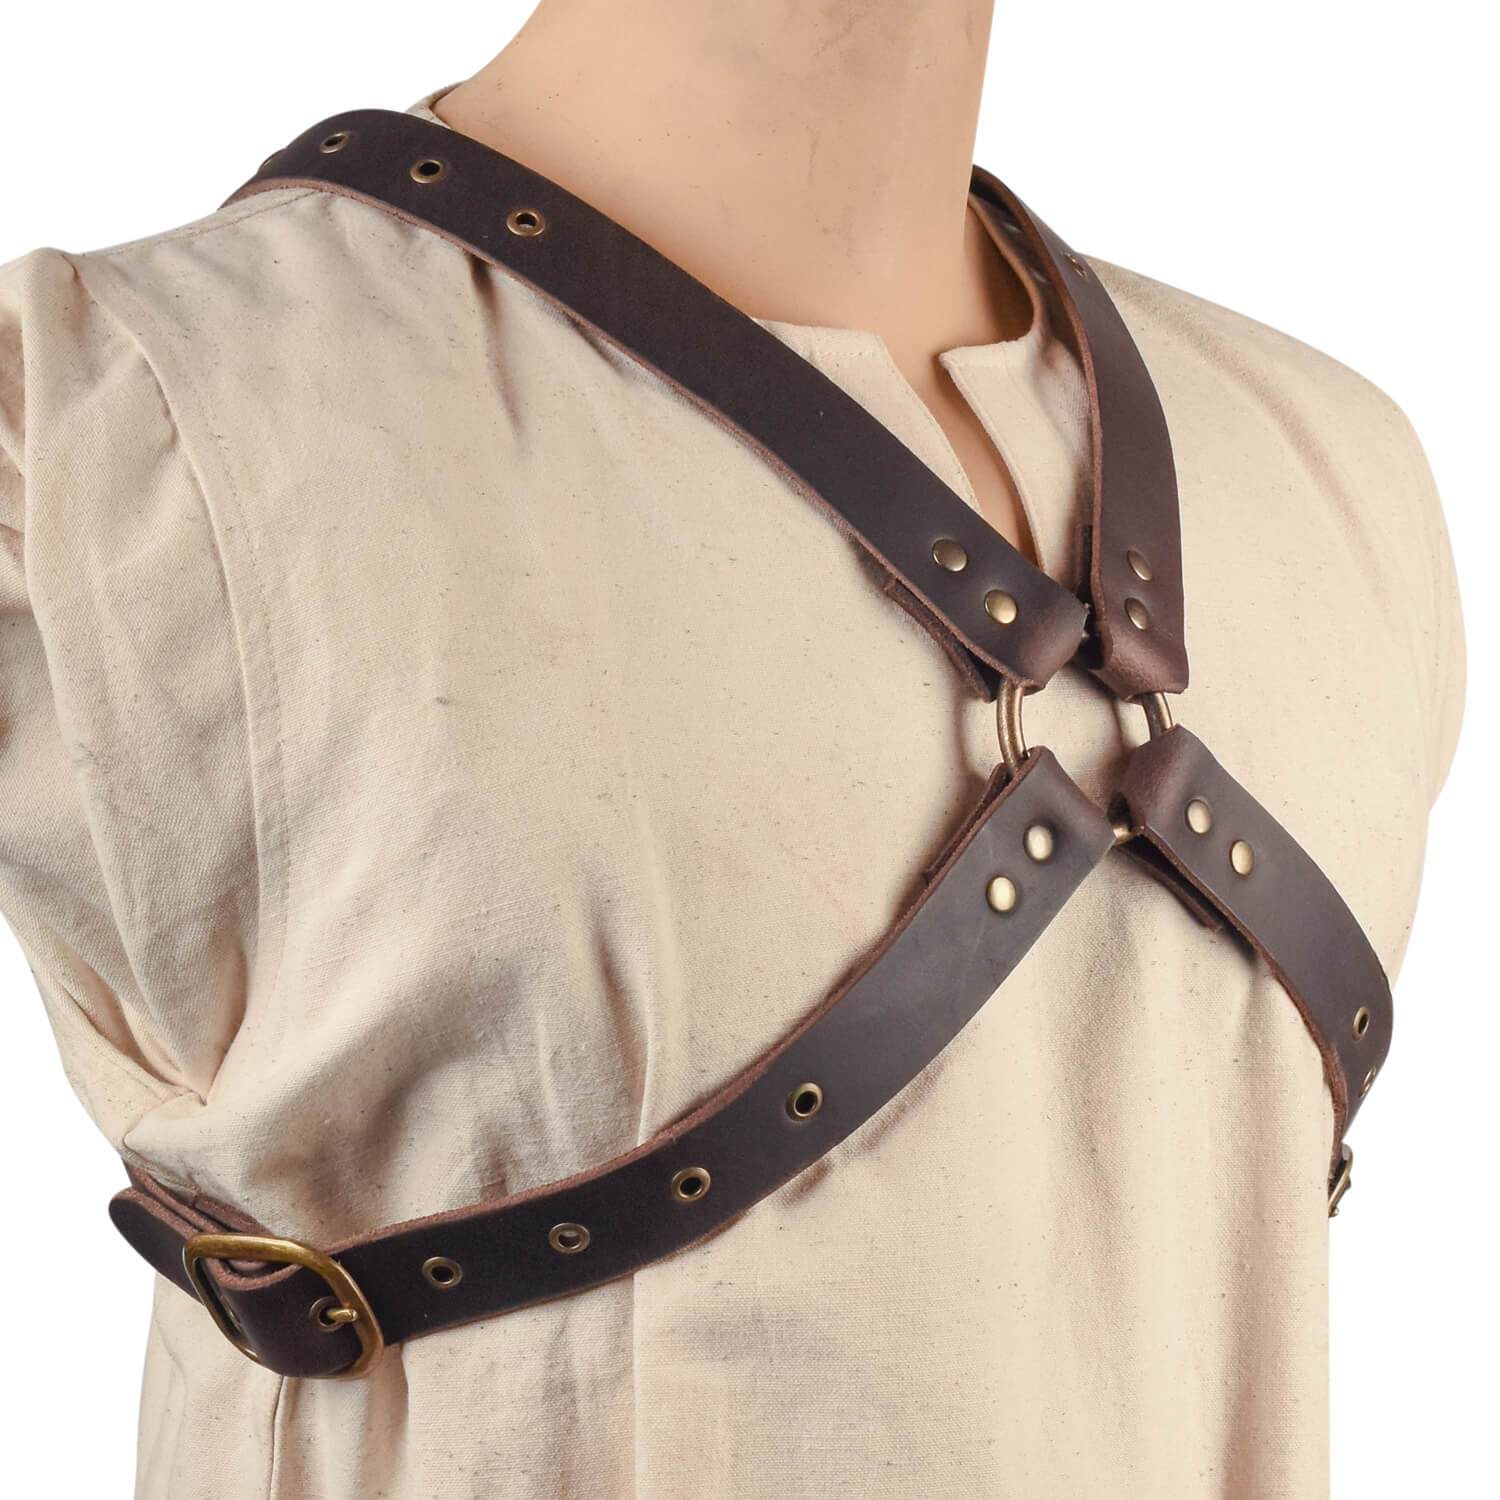 Harness in X | Boutique FDB